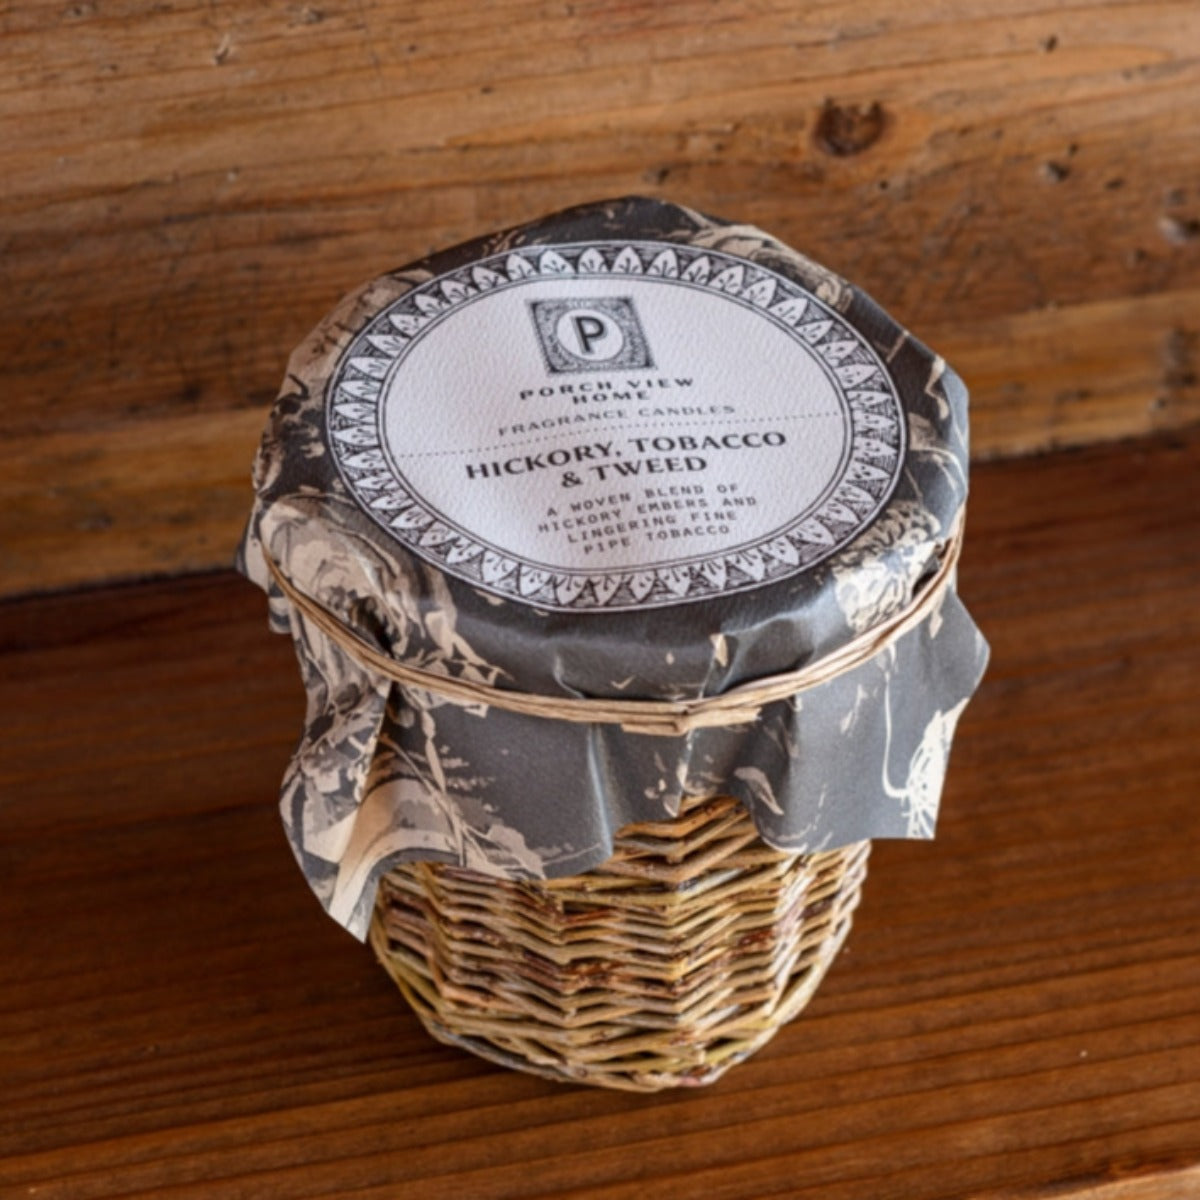 Hickory Tobacco & Tweed Candle